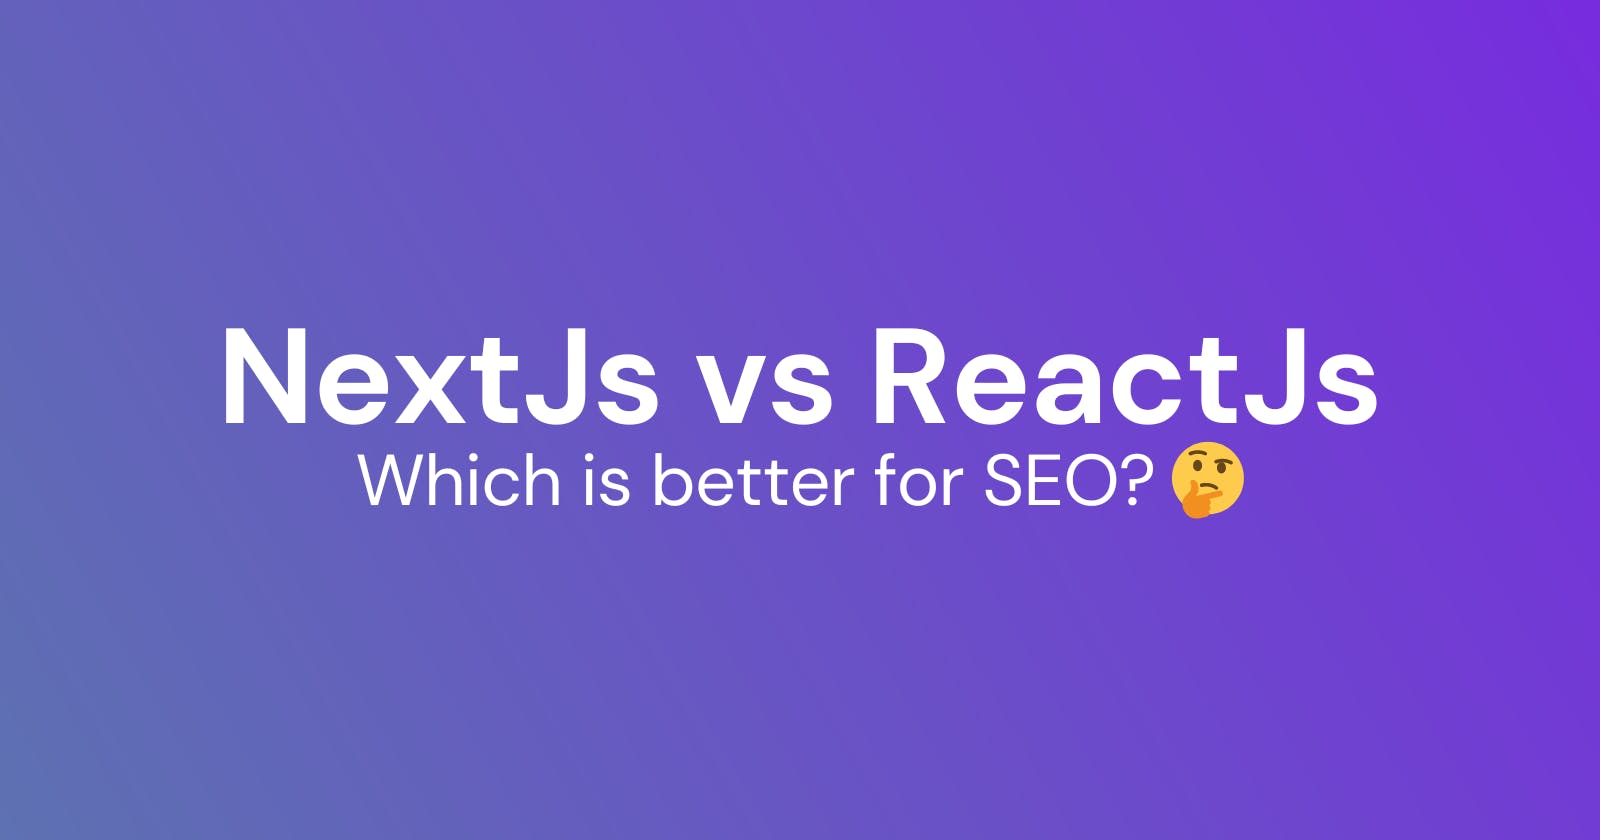 Why you should choose NextJs over ReactJs for better SEO and reach?